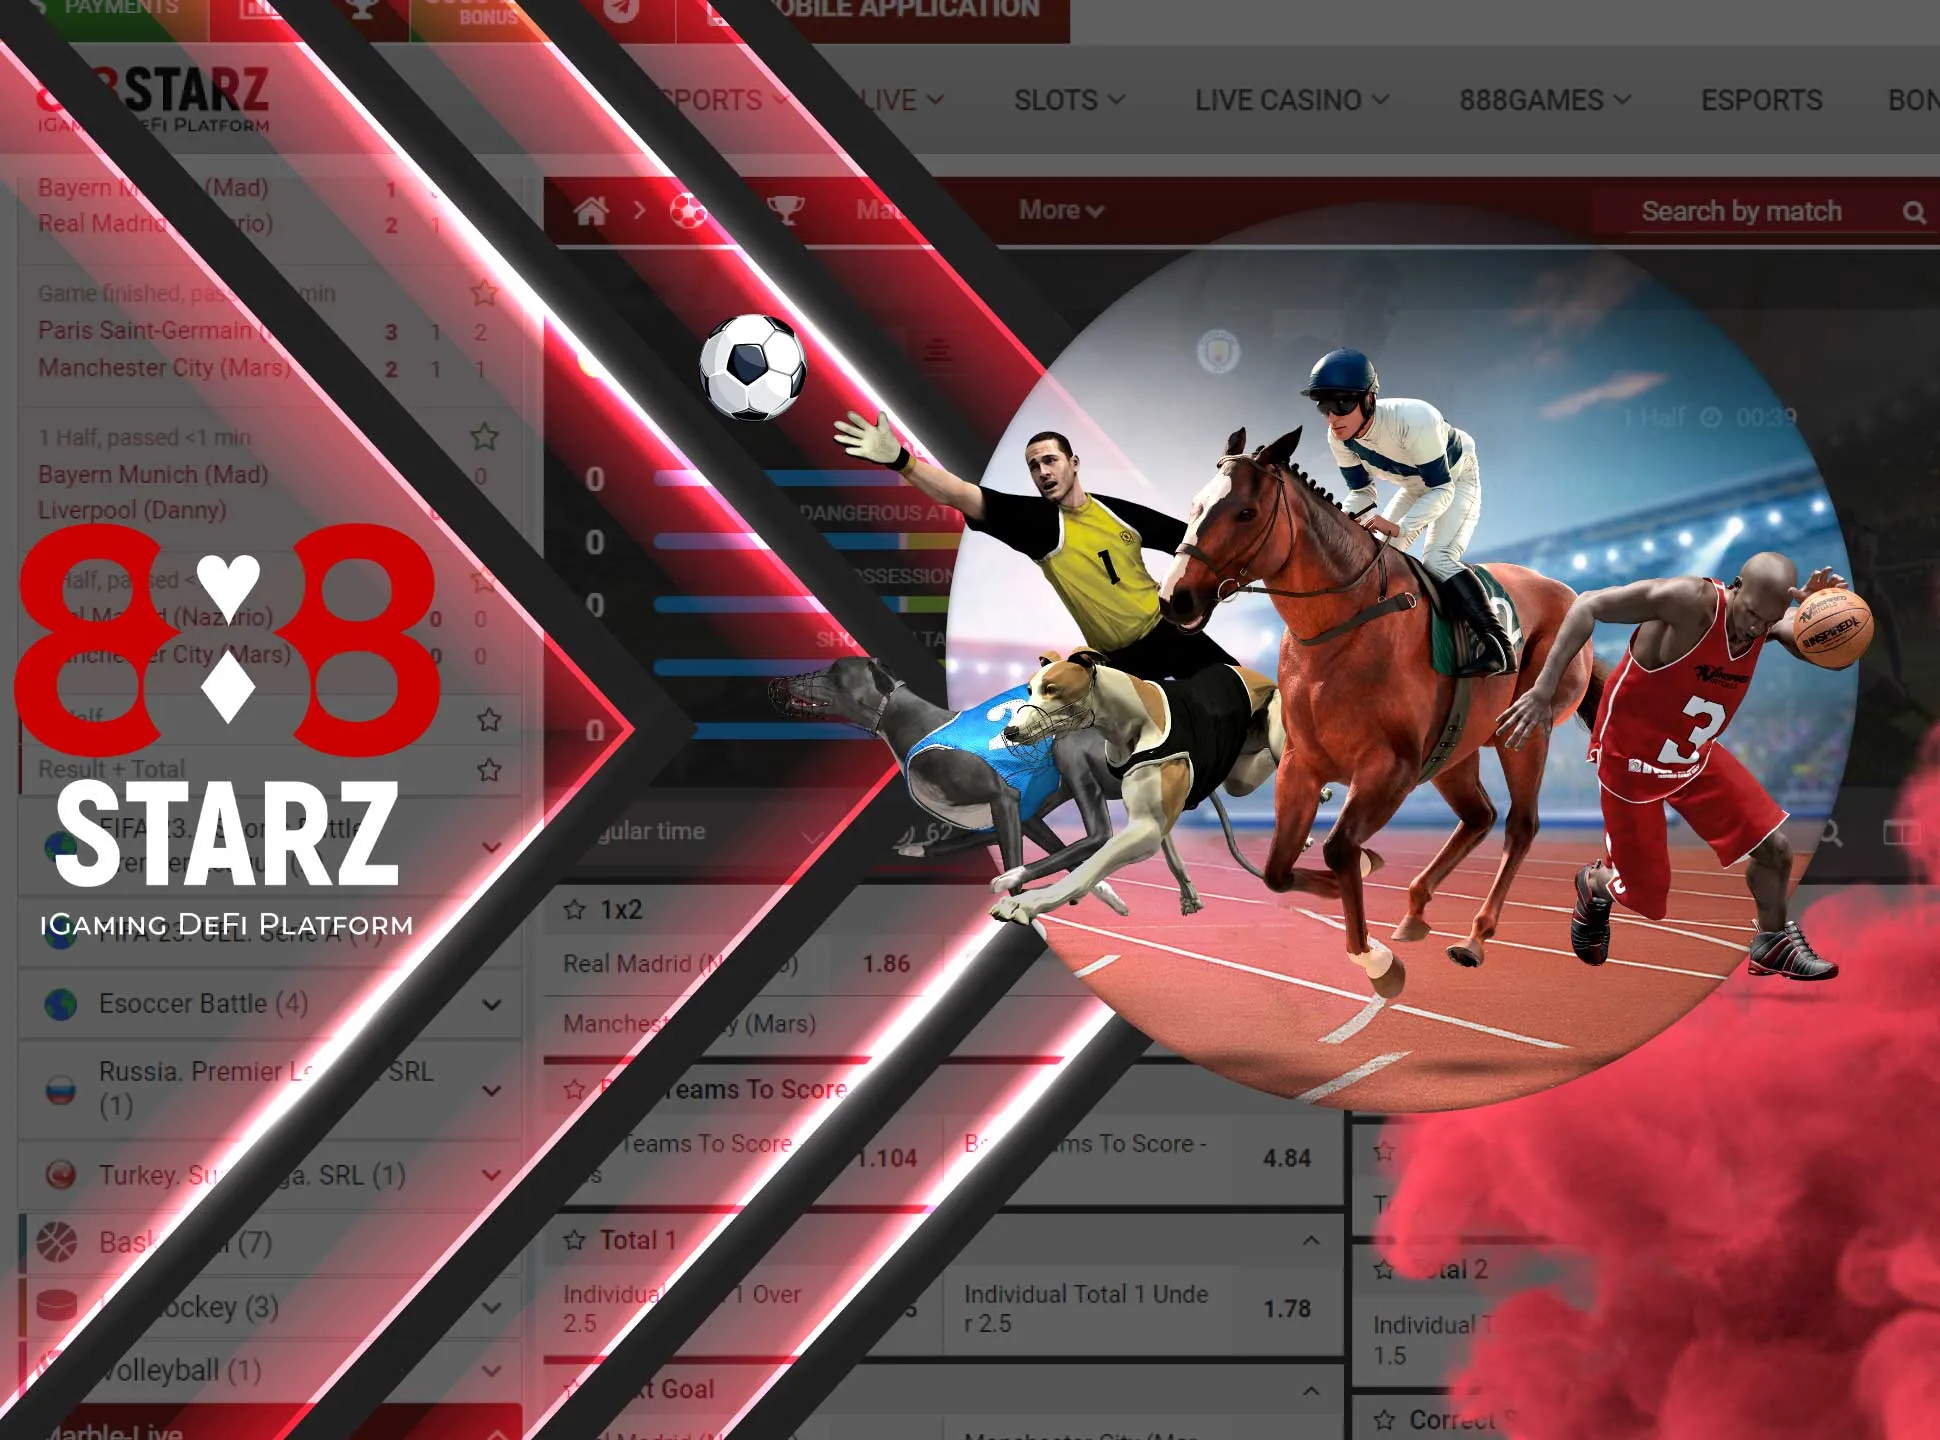 You can place bets on virtual football, horse racing or tennis as well as on real sports.